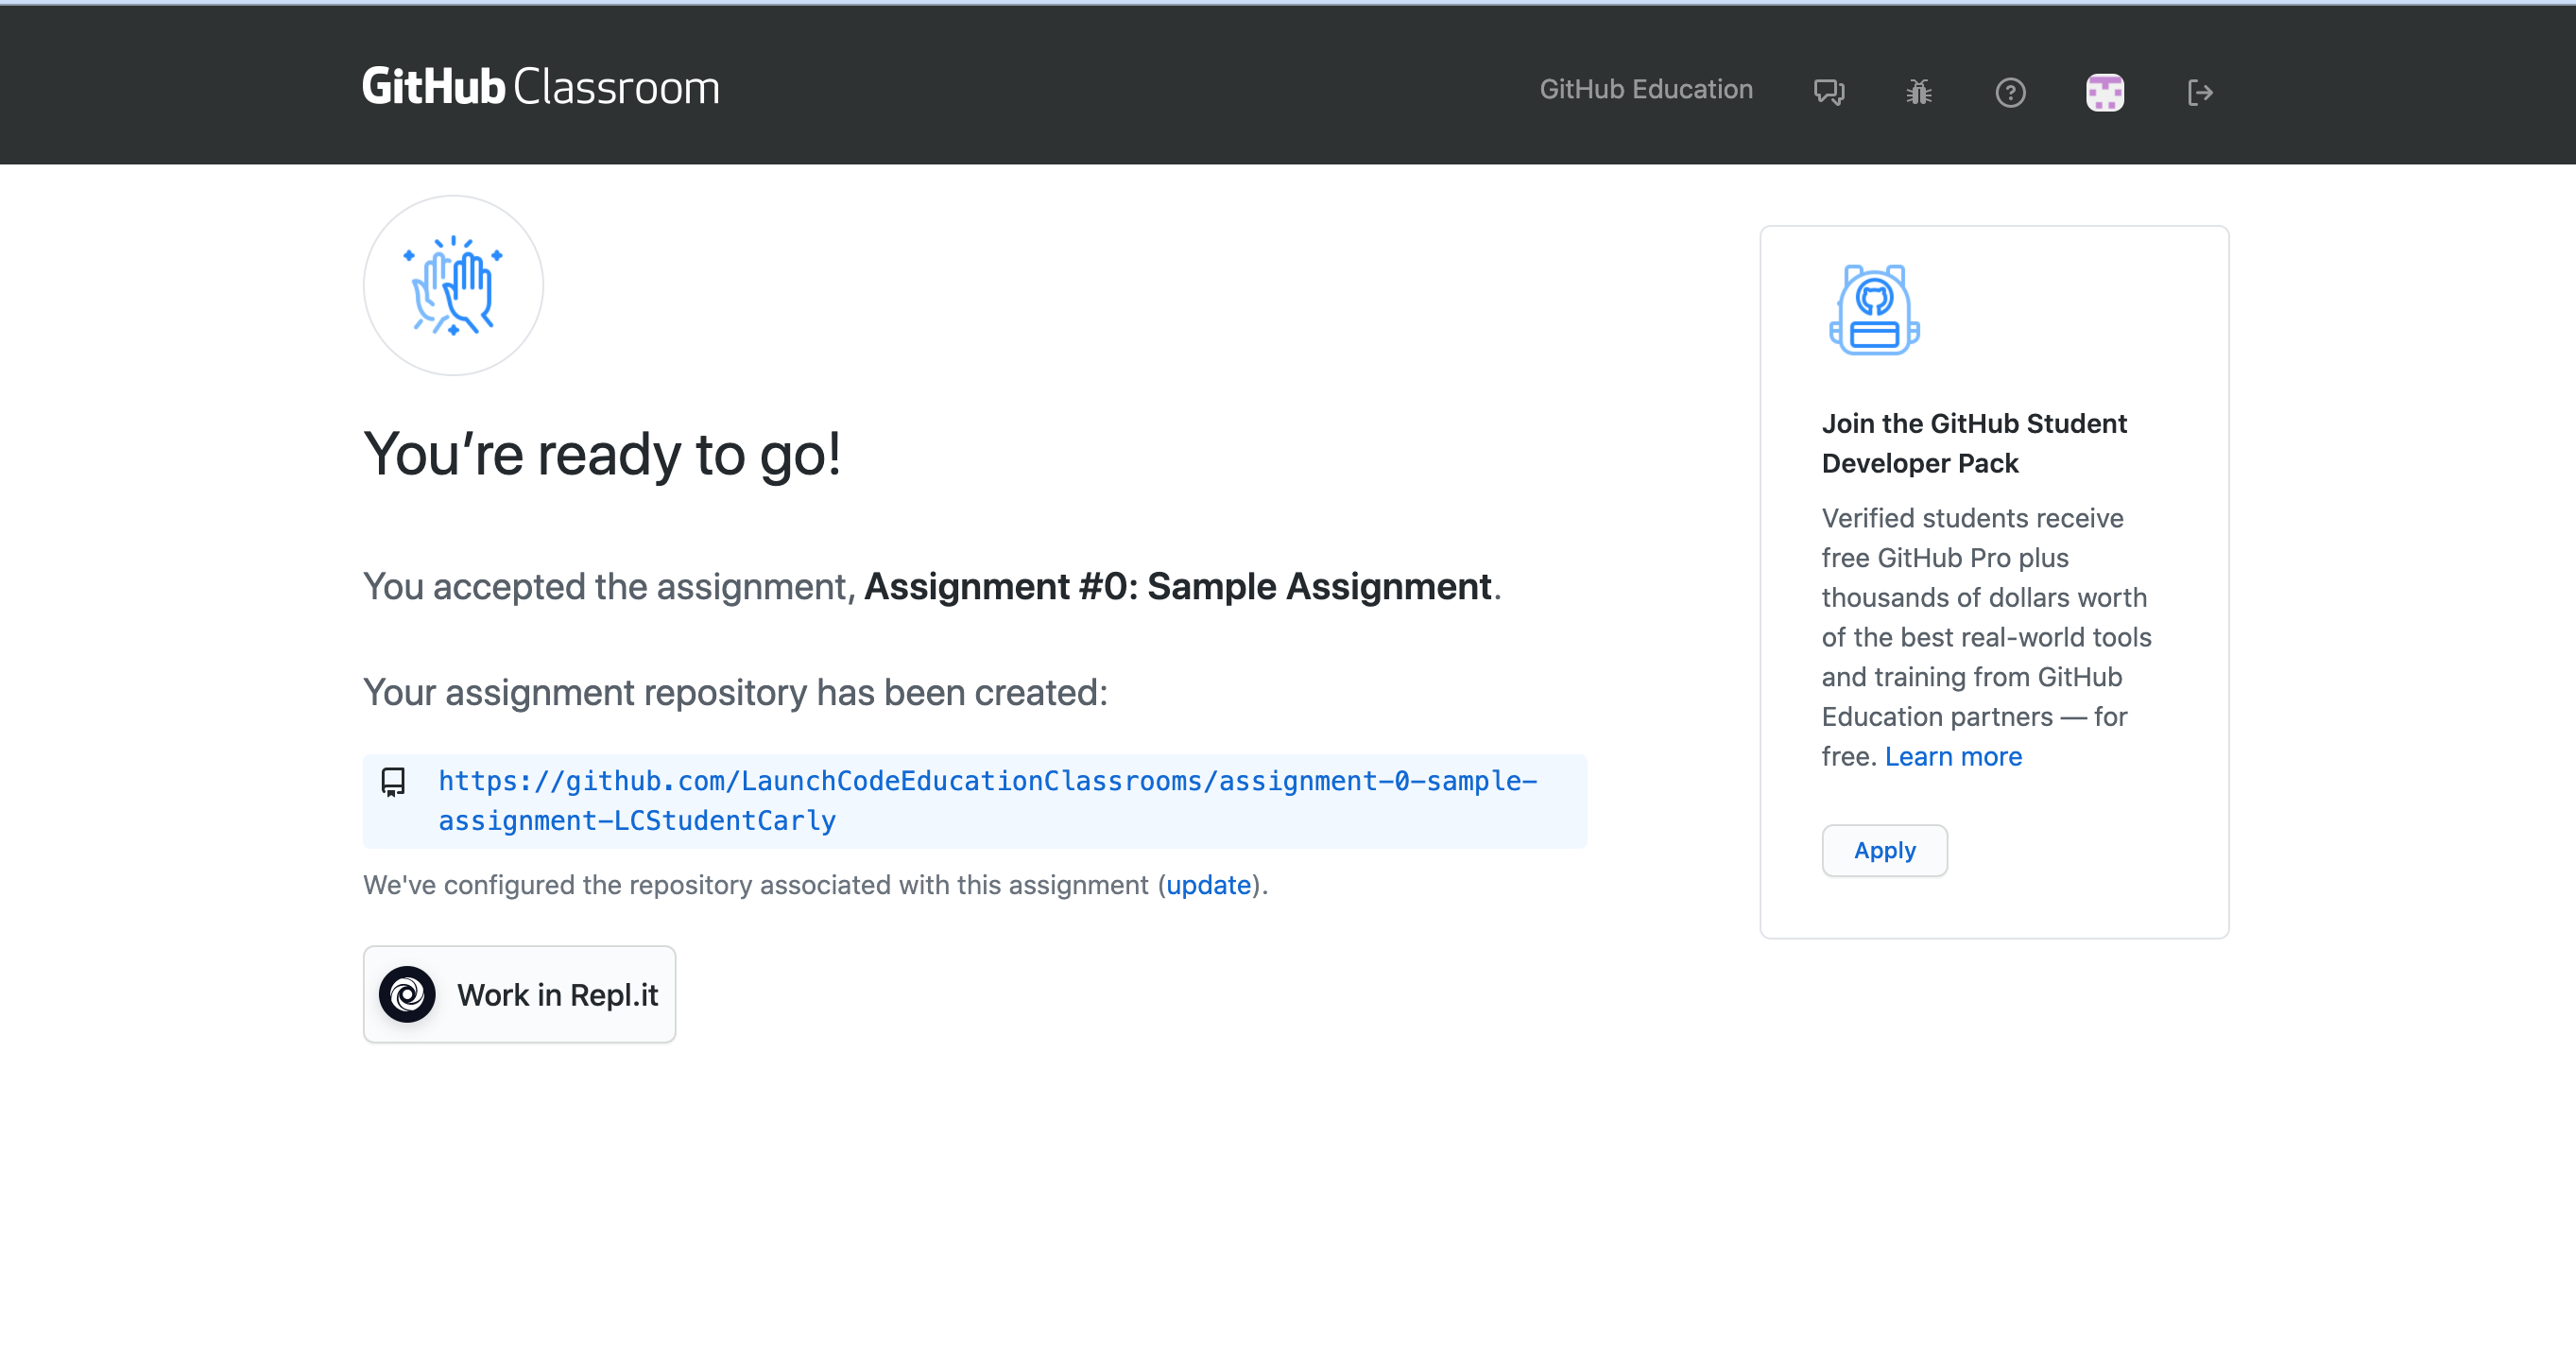 A GitHub Classroom assignment has been created.